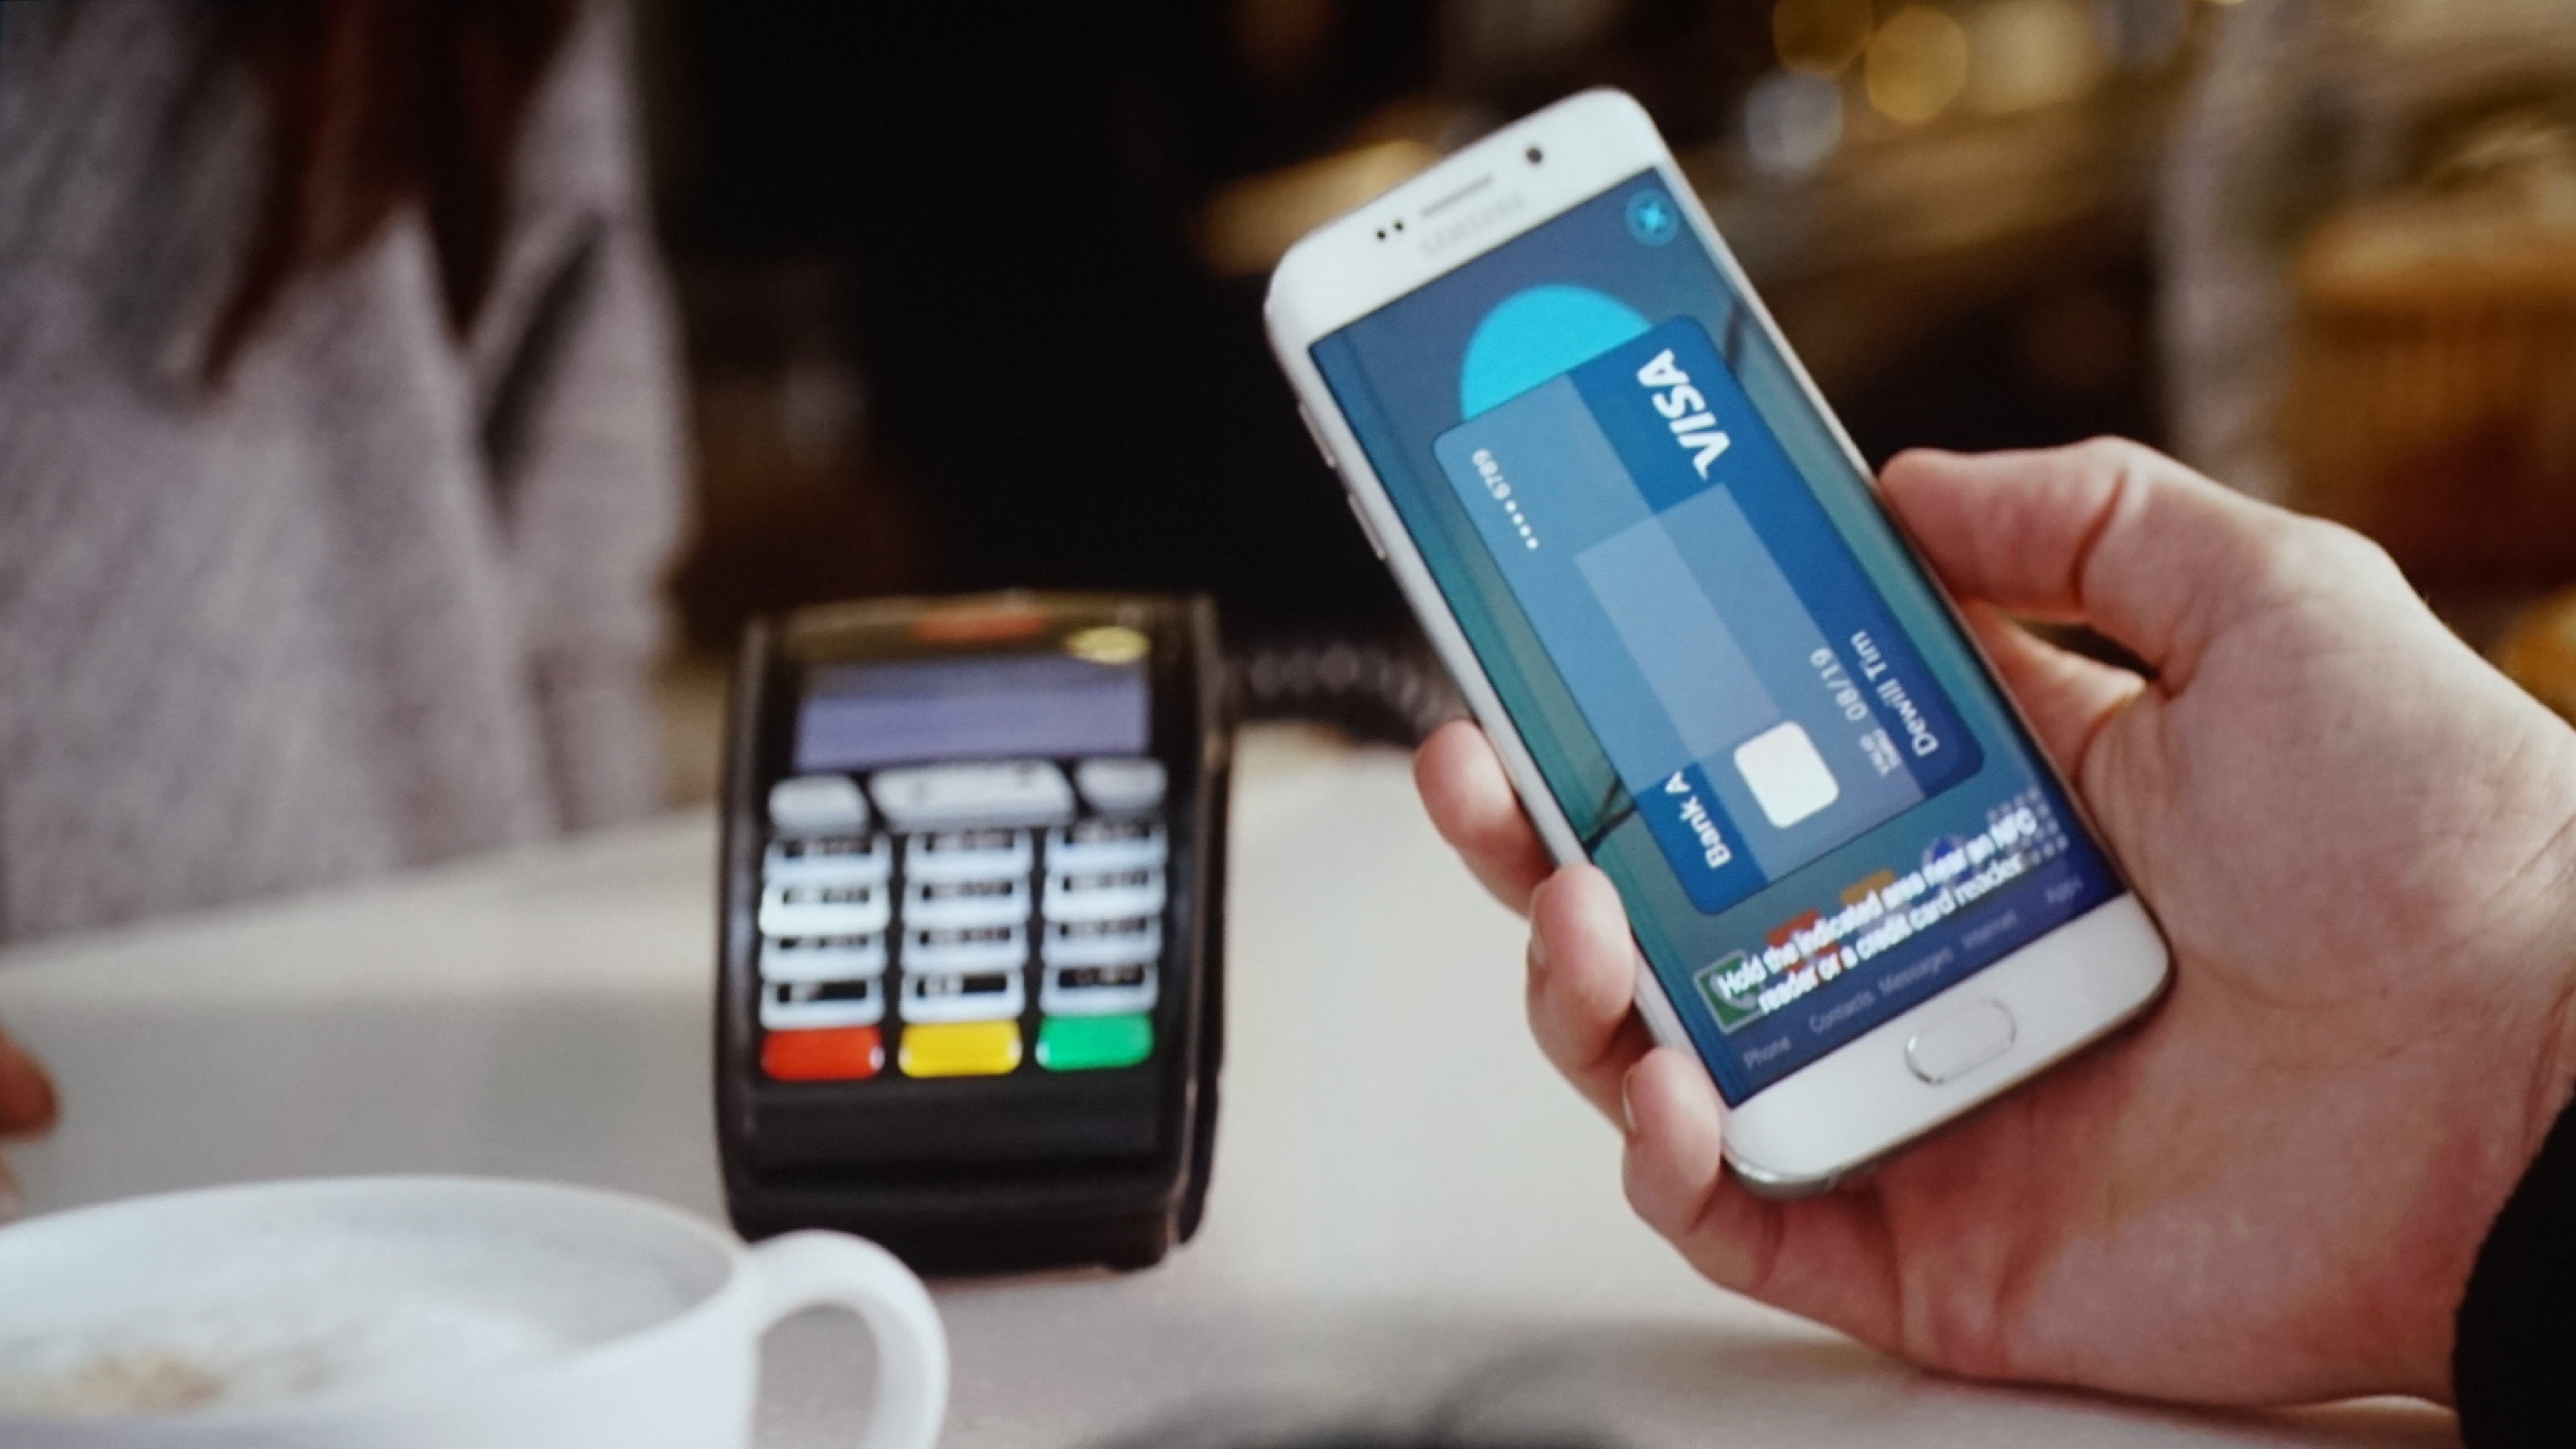 Sweden is the 13th country that Samsung Pay is heading to